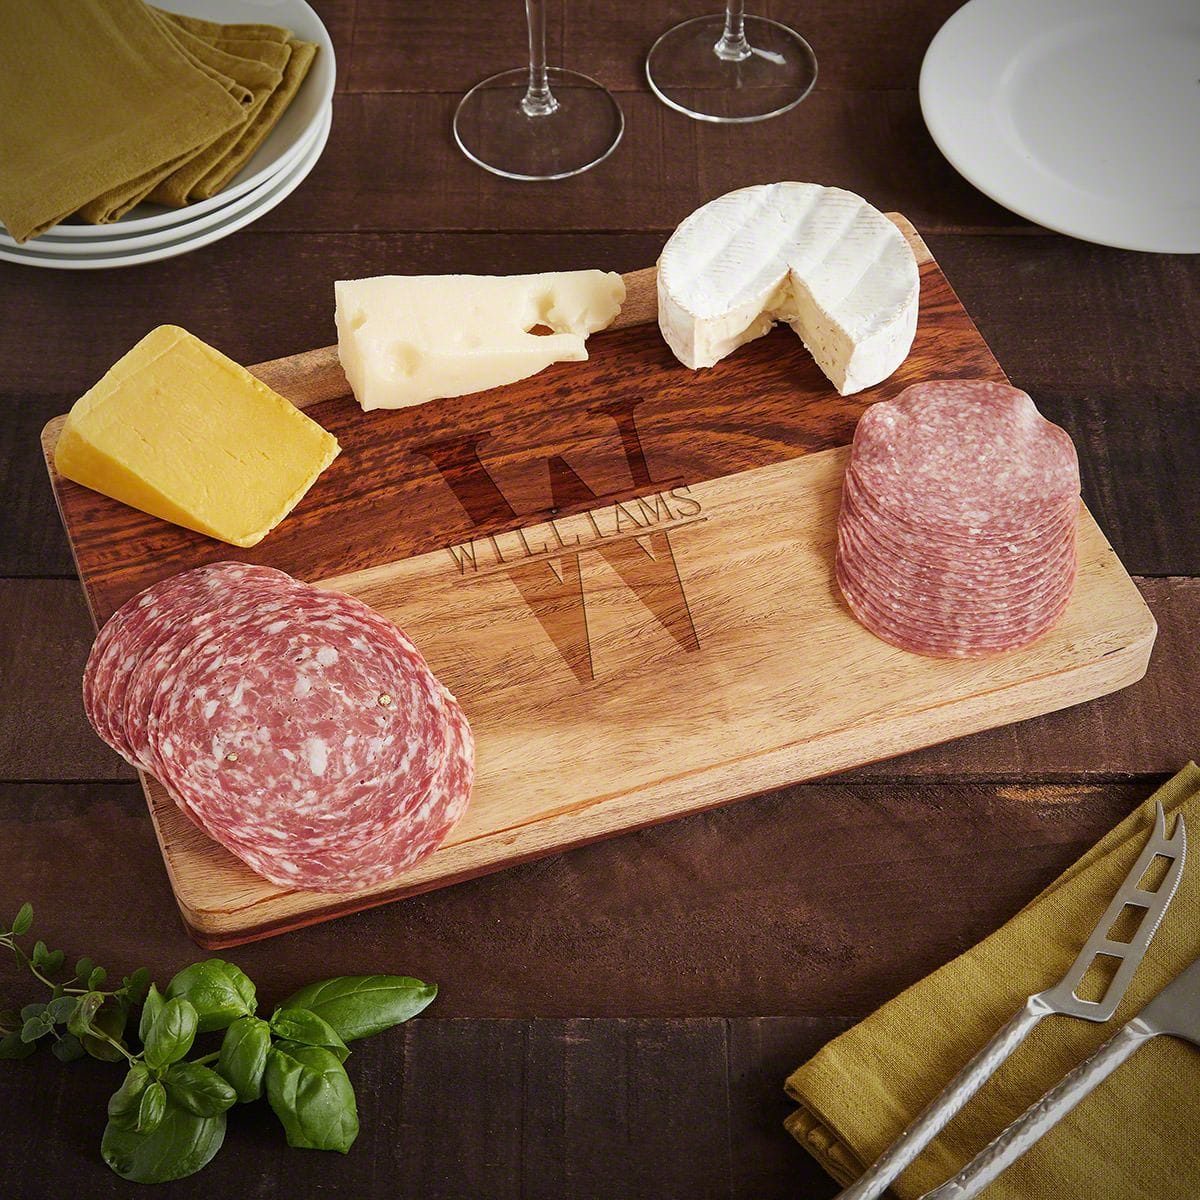 Small Charcuterie Box + Exotic Hardwood Personalized Charcuterie Board & Red Wine Gift - 1 Bottle